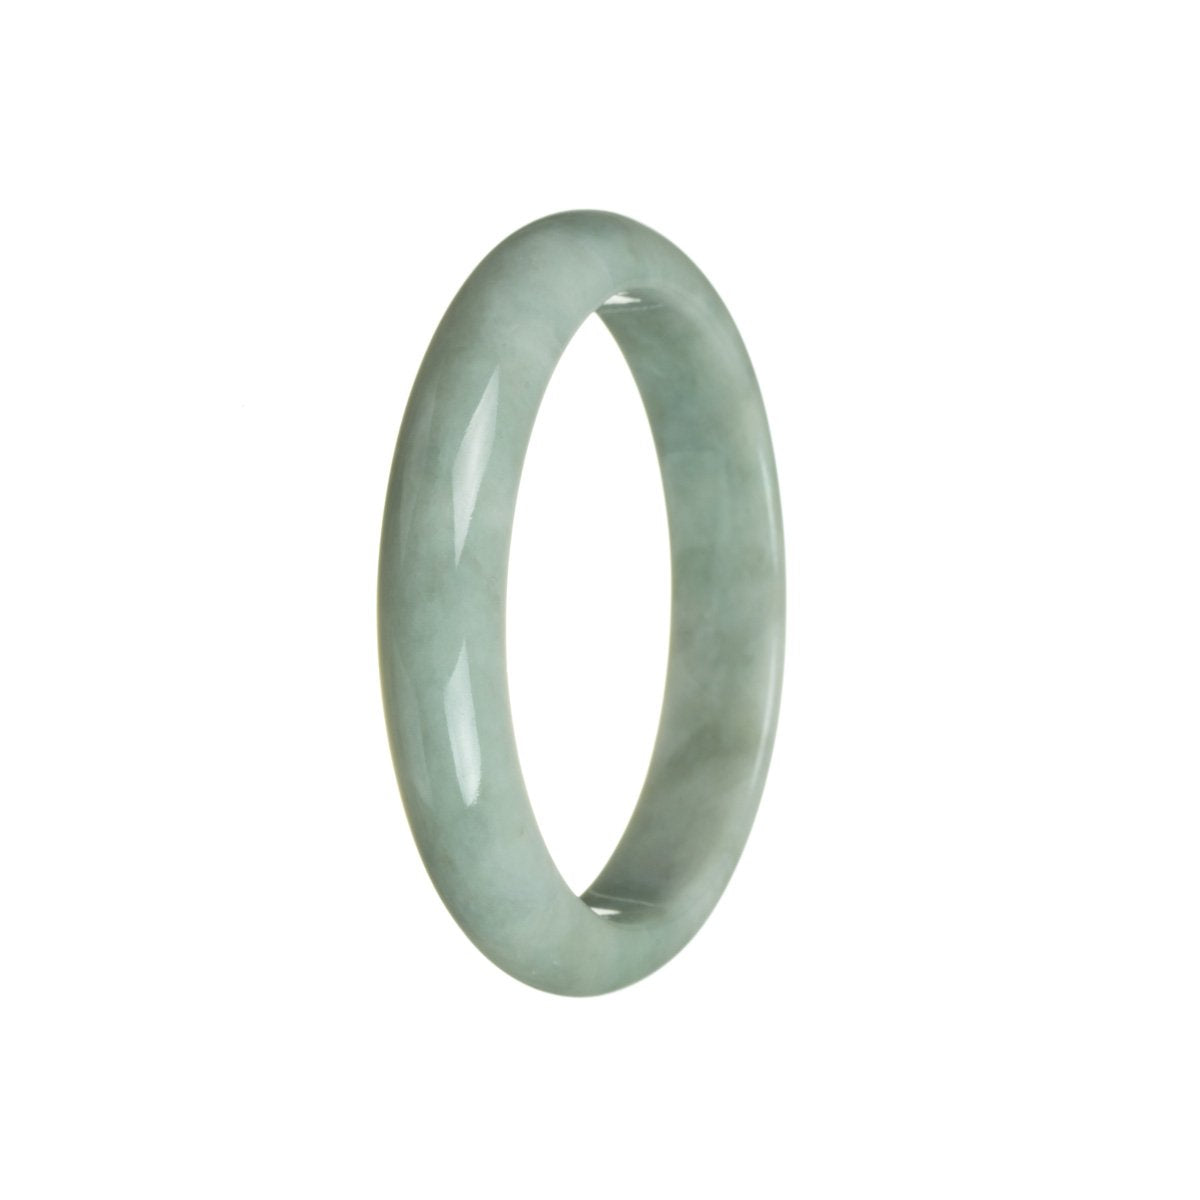 A beautiful half-moon shaped green jadeite bracelet, certified as 100% natural. The bracelet has a diameter of 59mm and is handcrafted by MAYS.